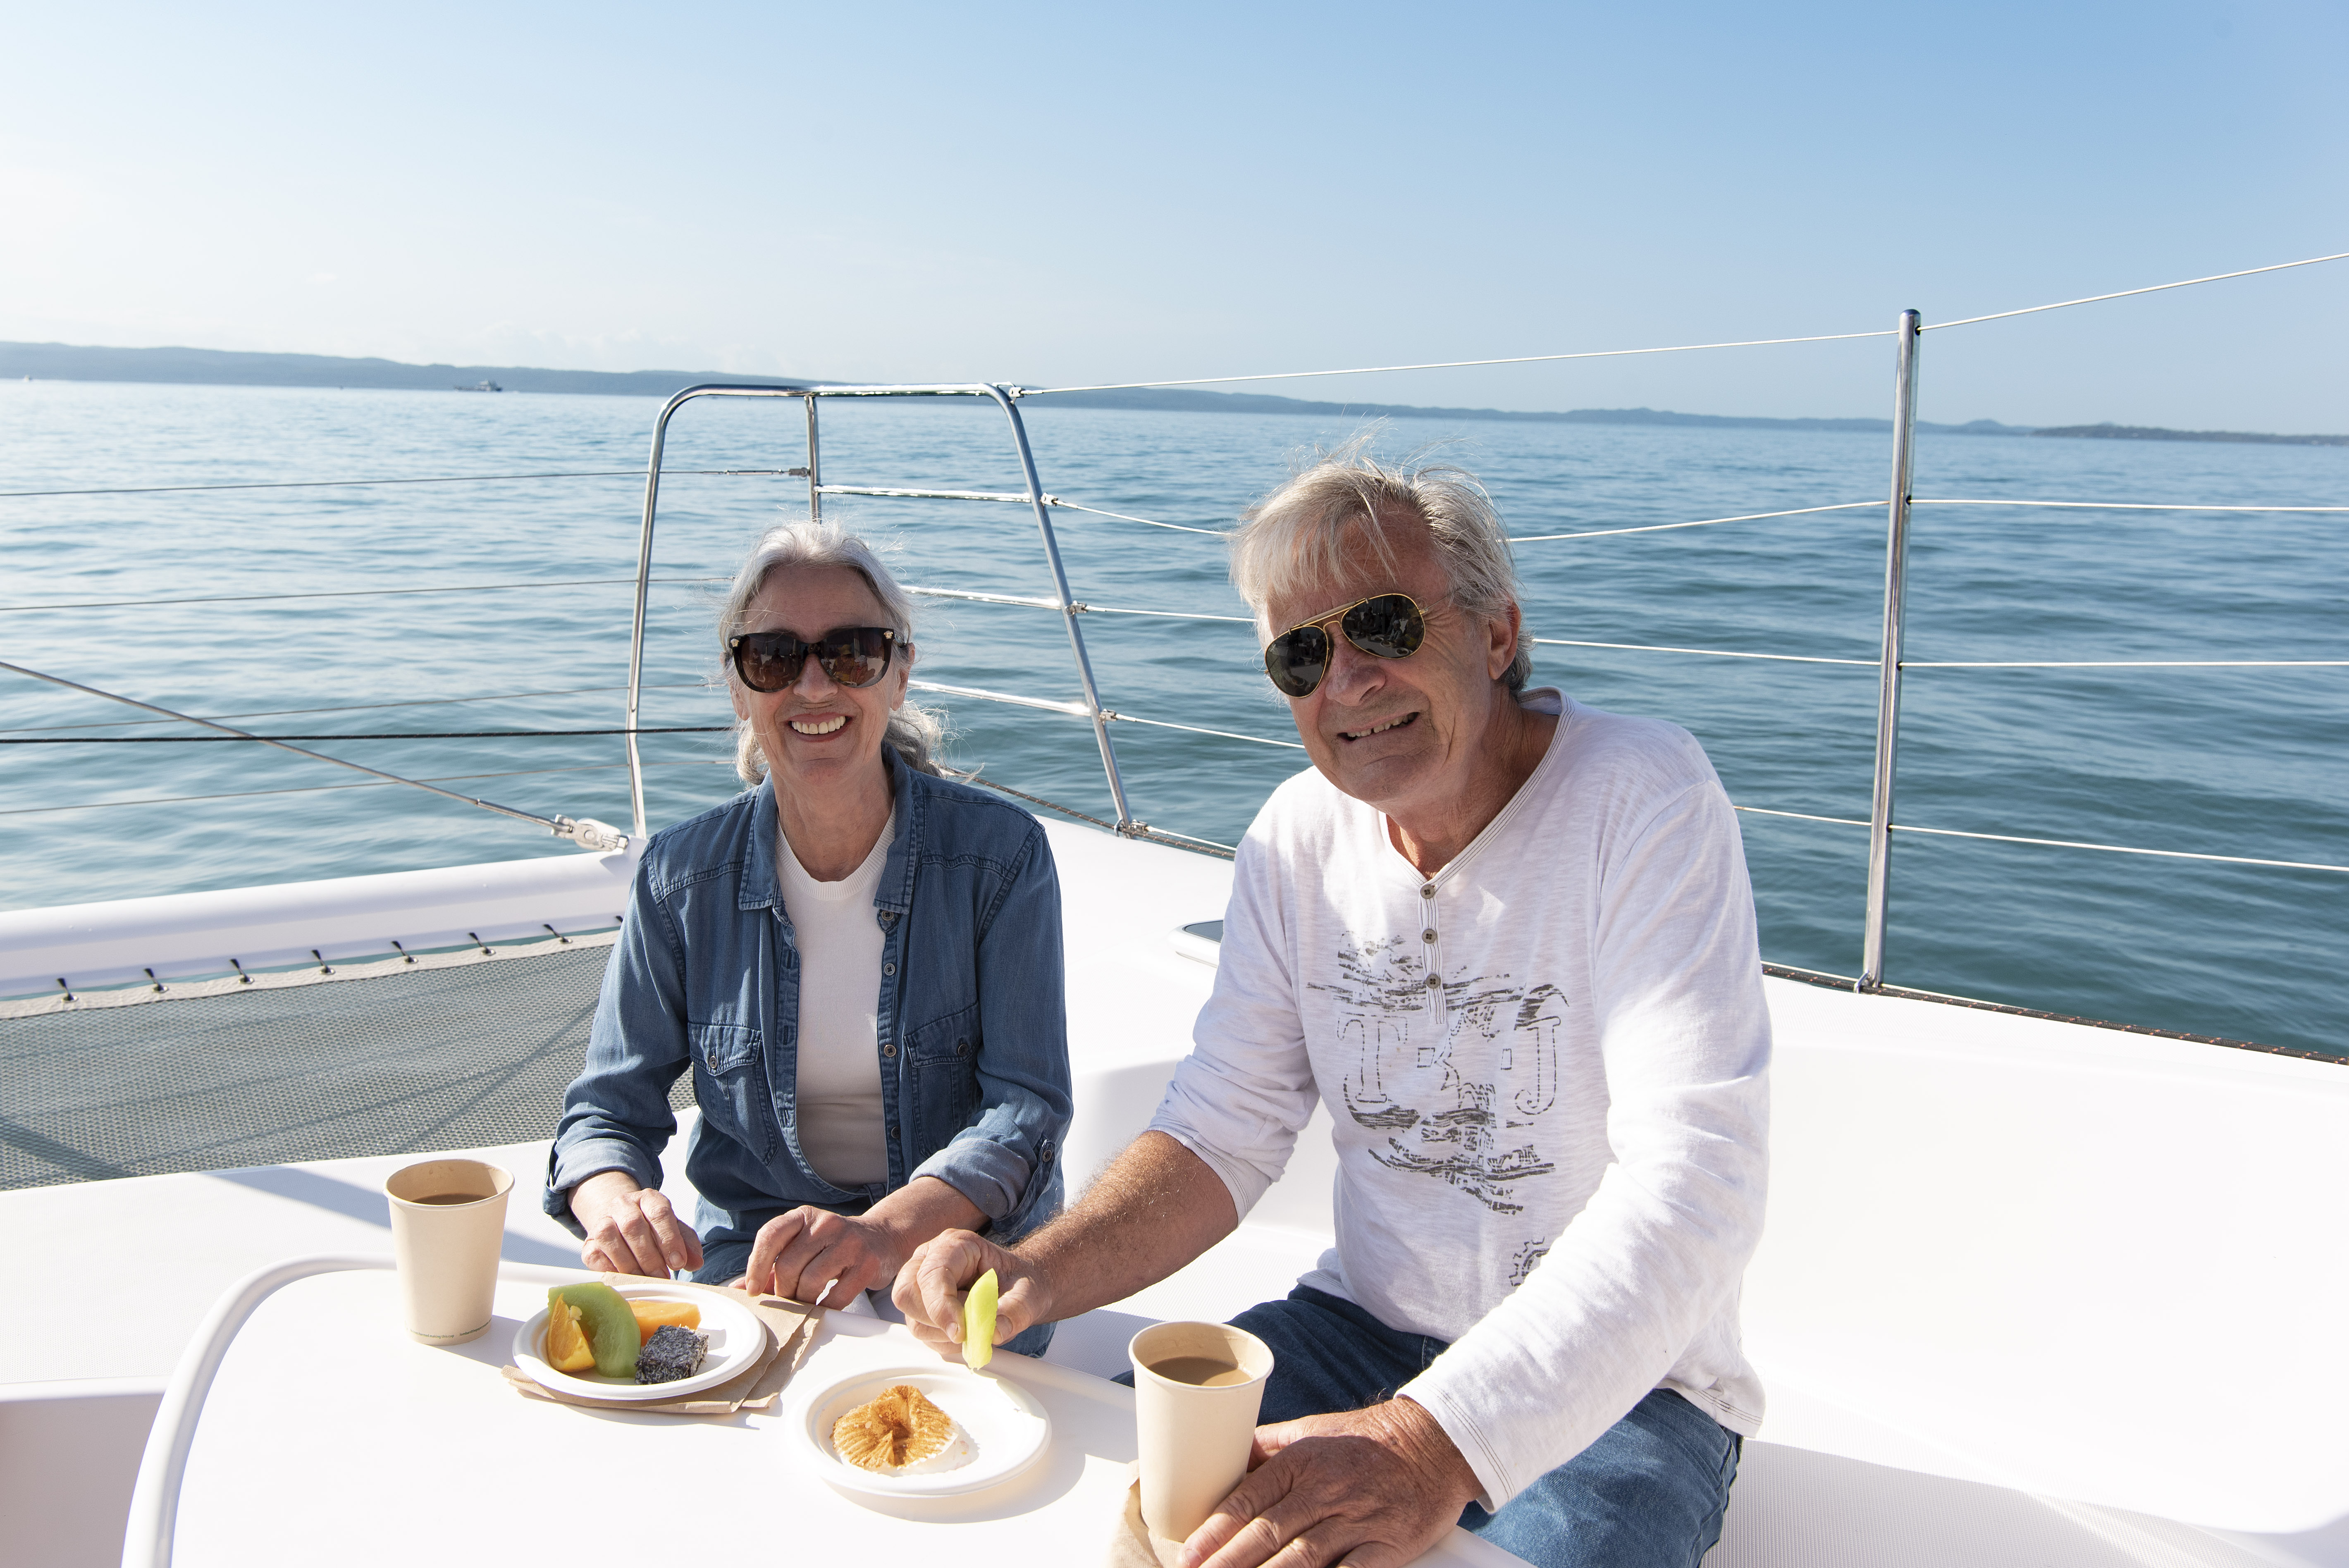 Come aboard Aria Cruises for a 5 hour adventure as we cruise Moreton Bay and sail to Peel Island!